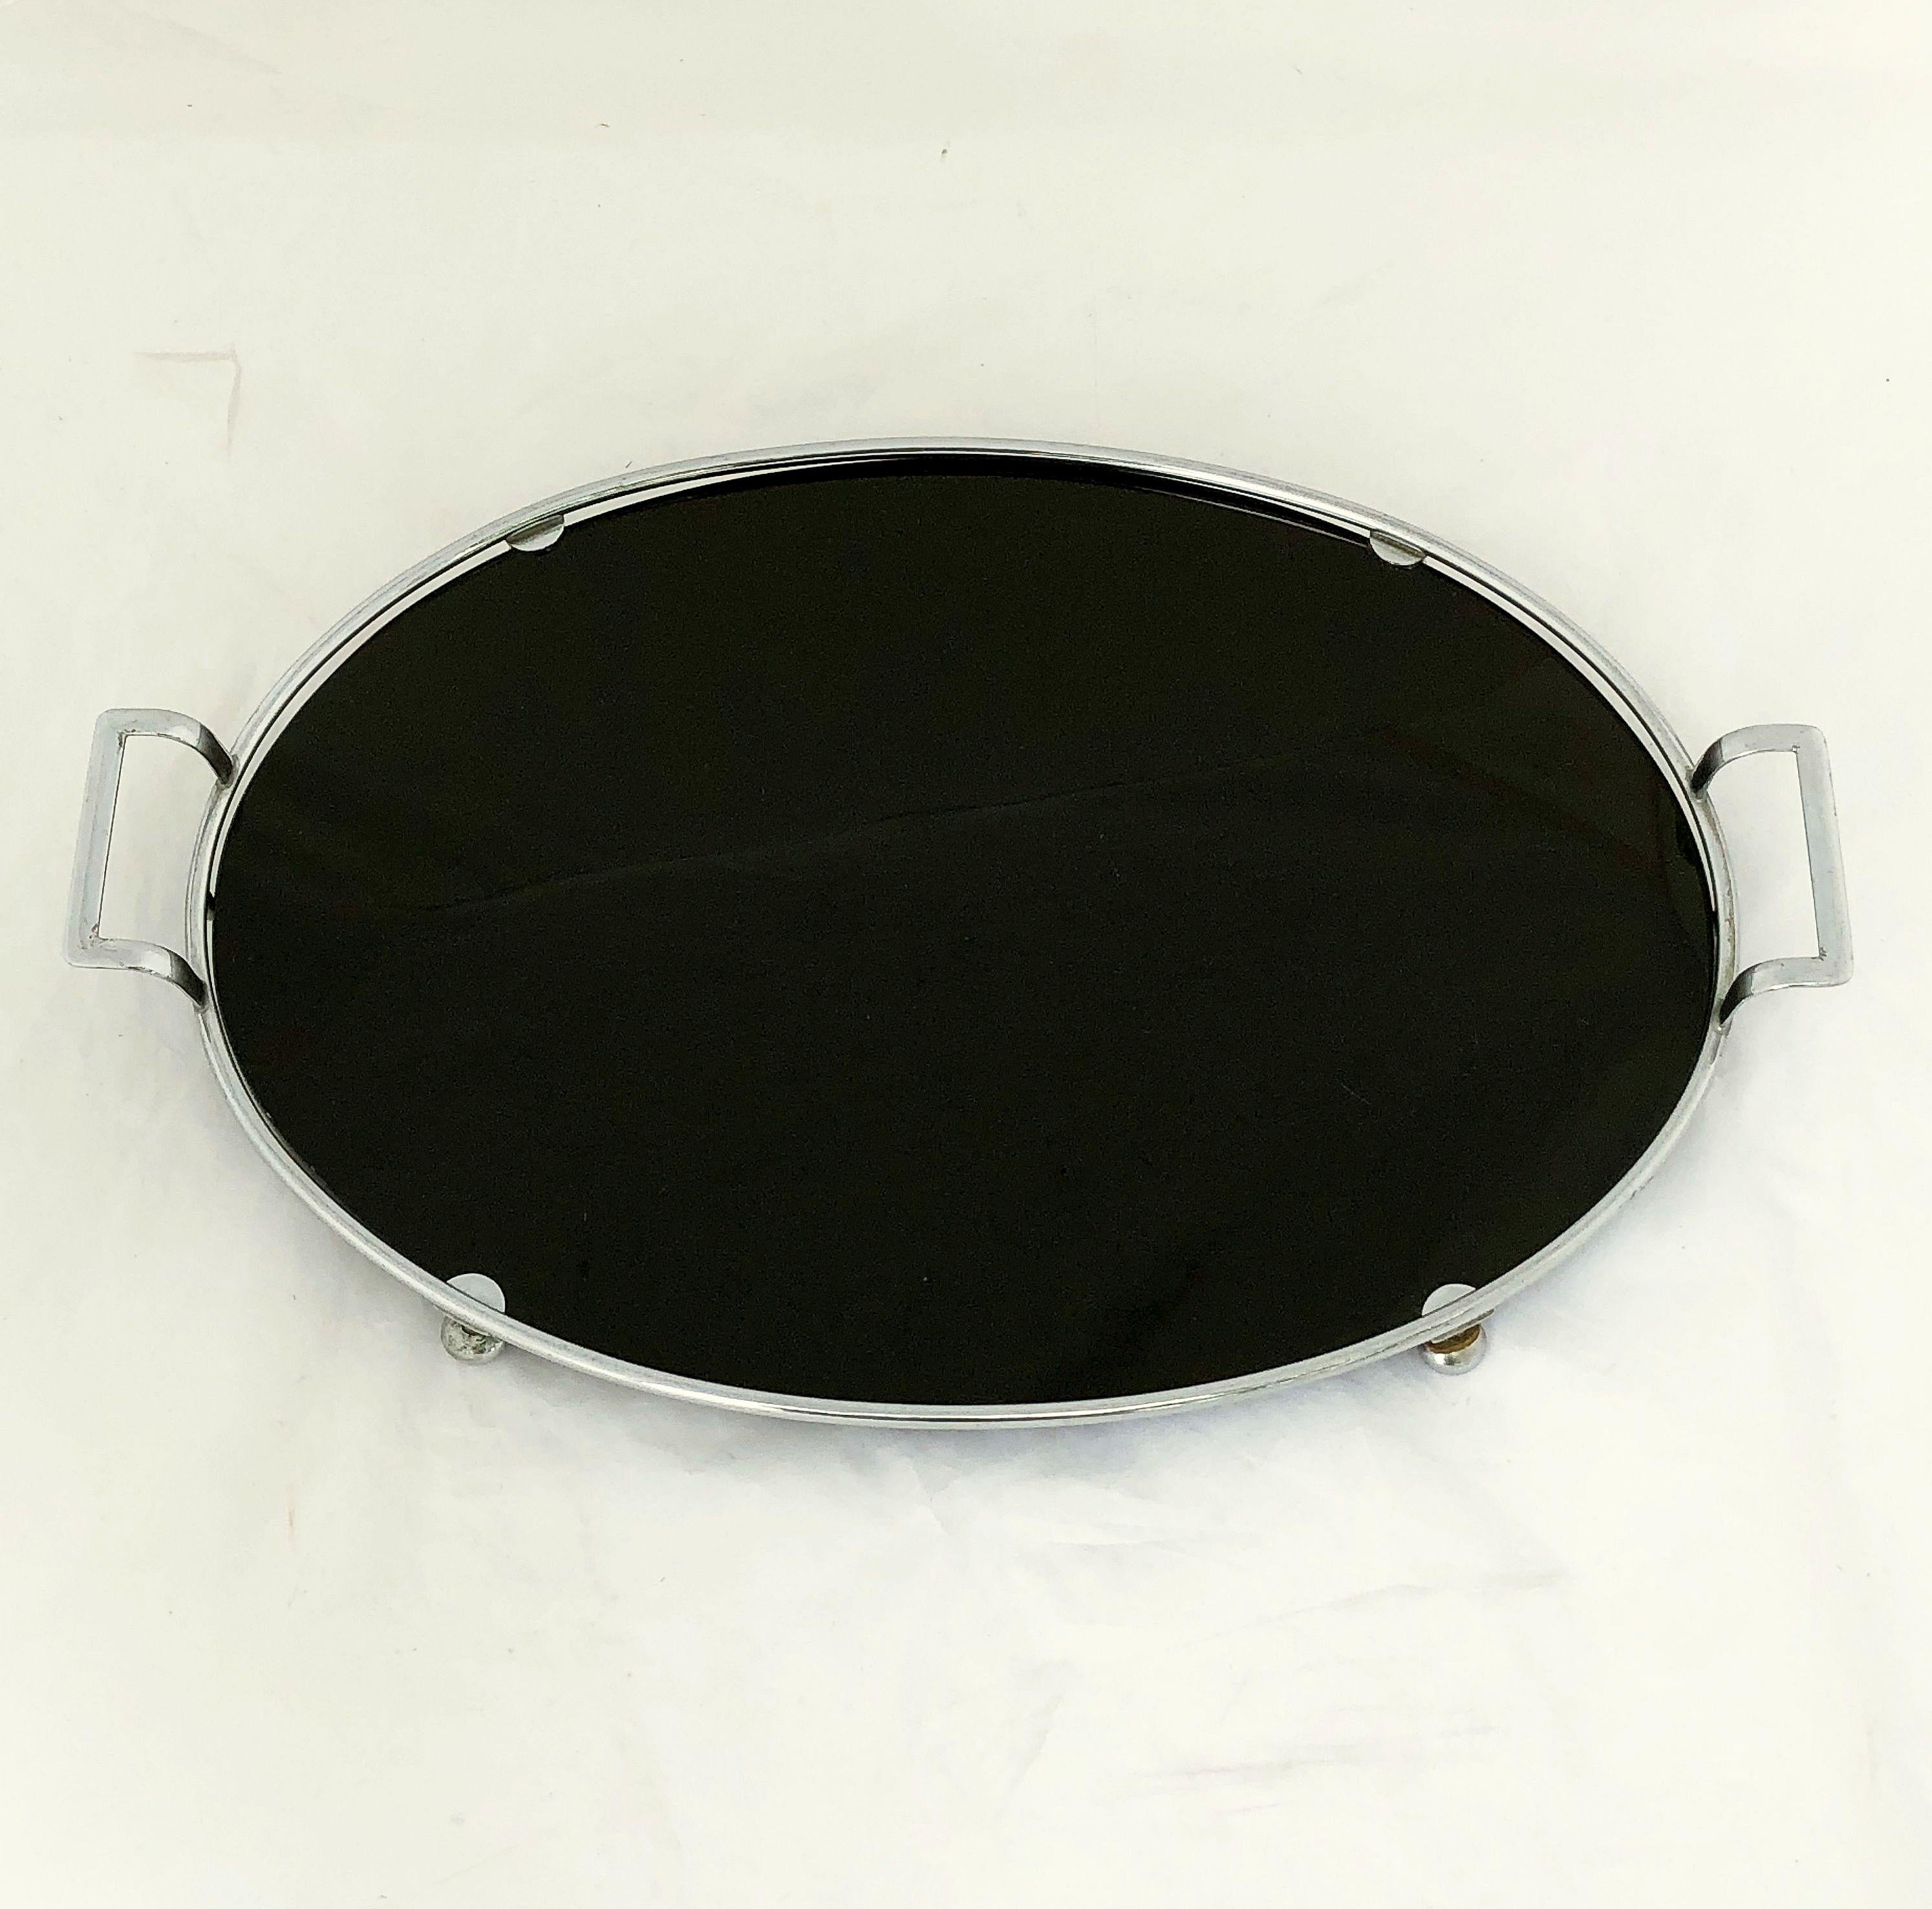 Metal English Oval Serving Tray of Black Glass and Chrome from the Art Deco Period